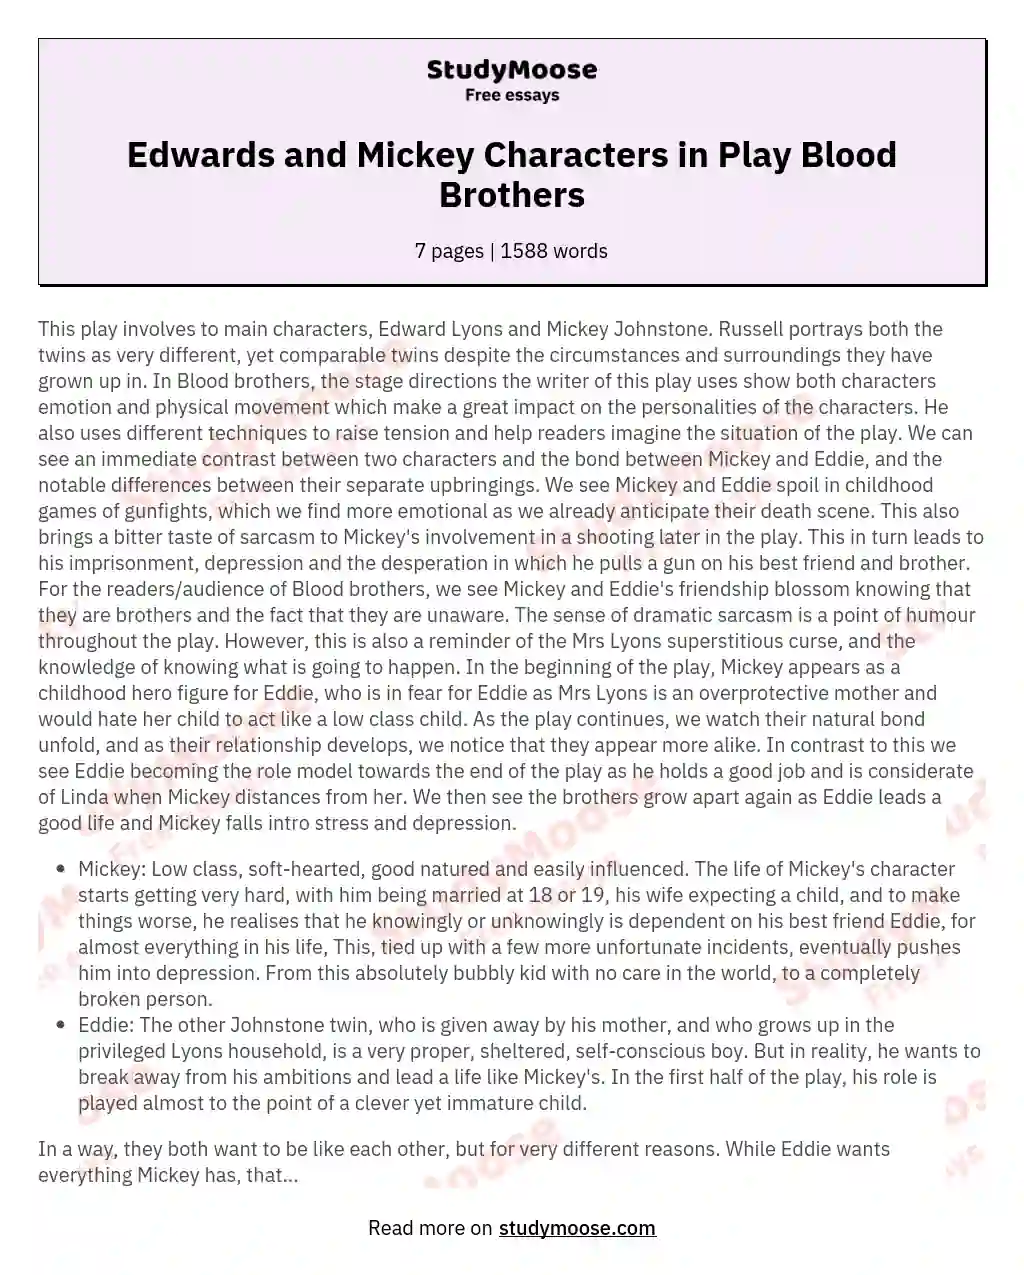 Edwards and Mickey Characters in Play Blood Brothers essay